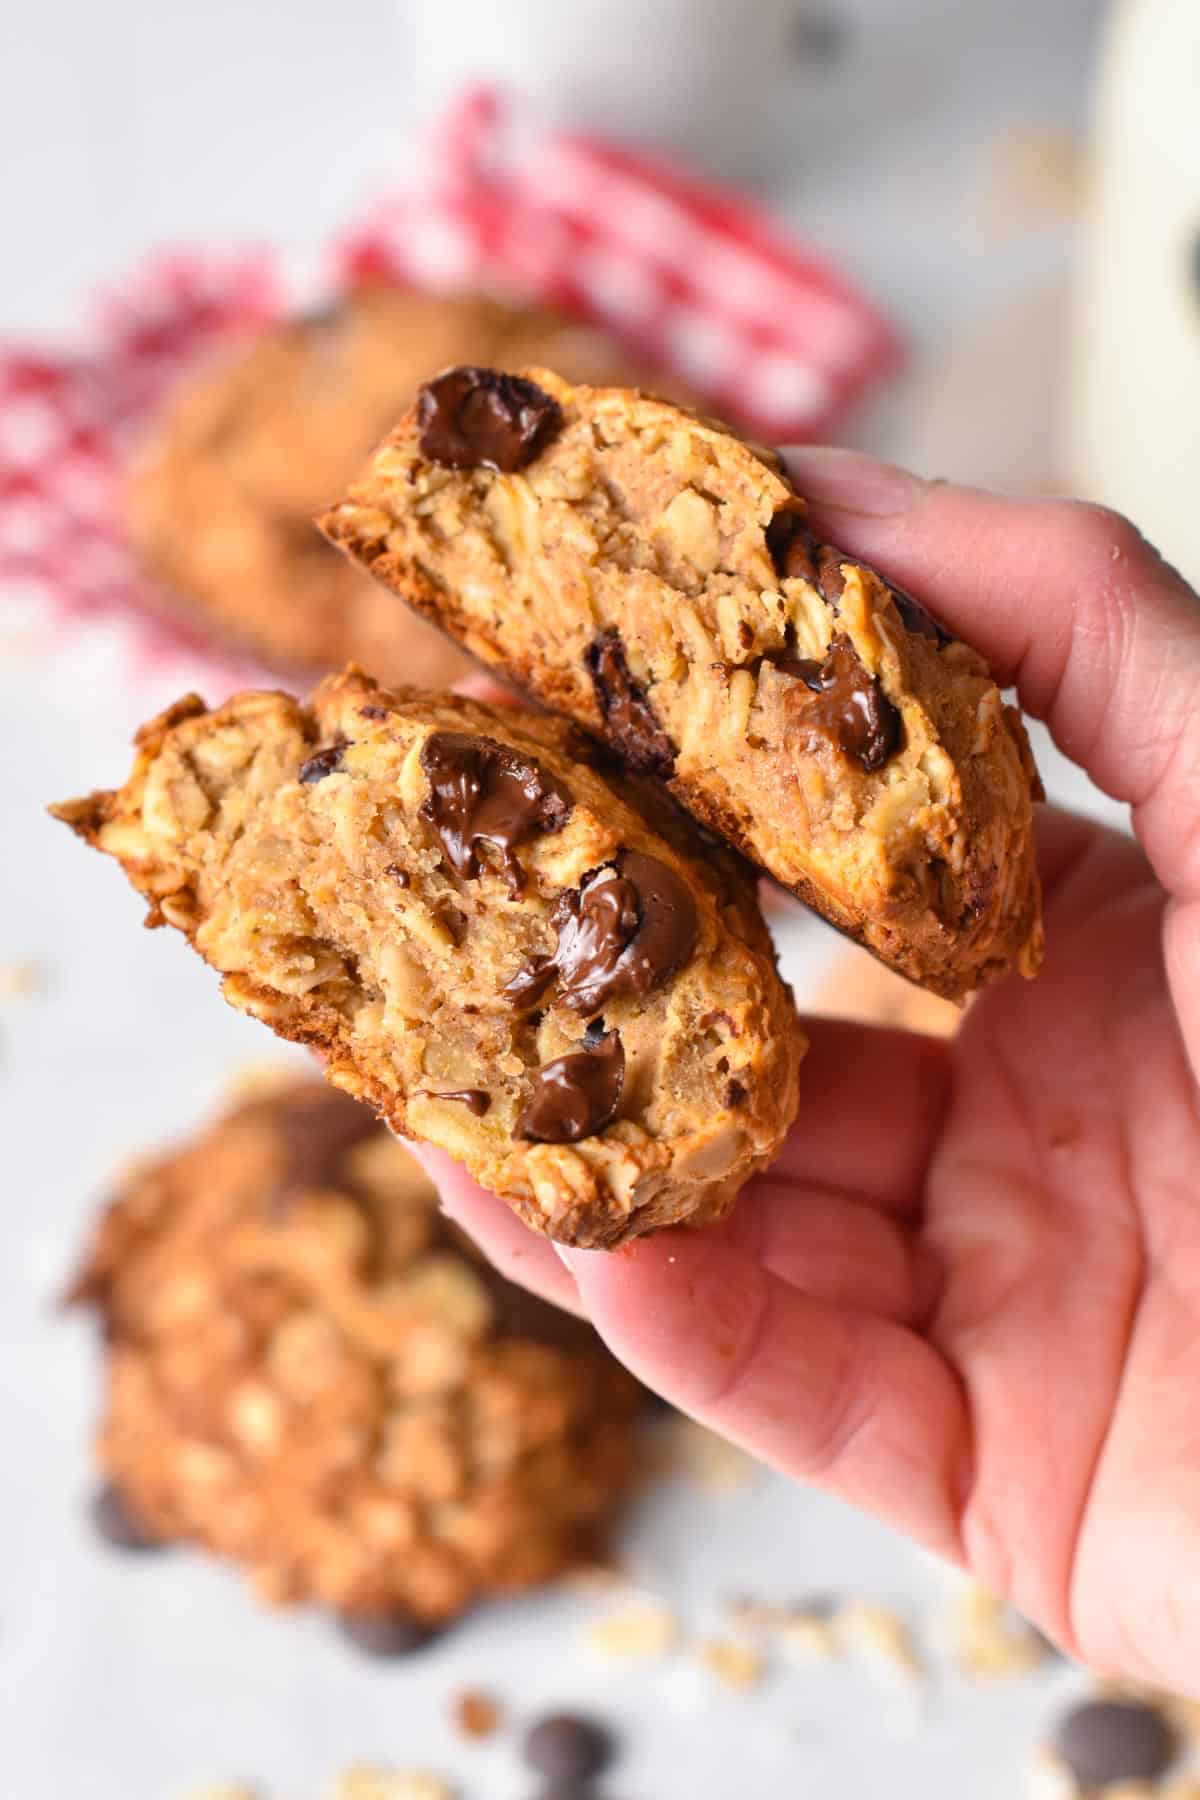 These Protein Oatmeal Cookies are easy oatmeal cookies packed with 14 grams of protein and a delicious banana, peanut butter, and chocolate flavor